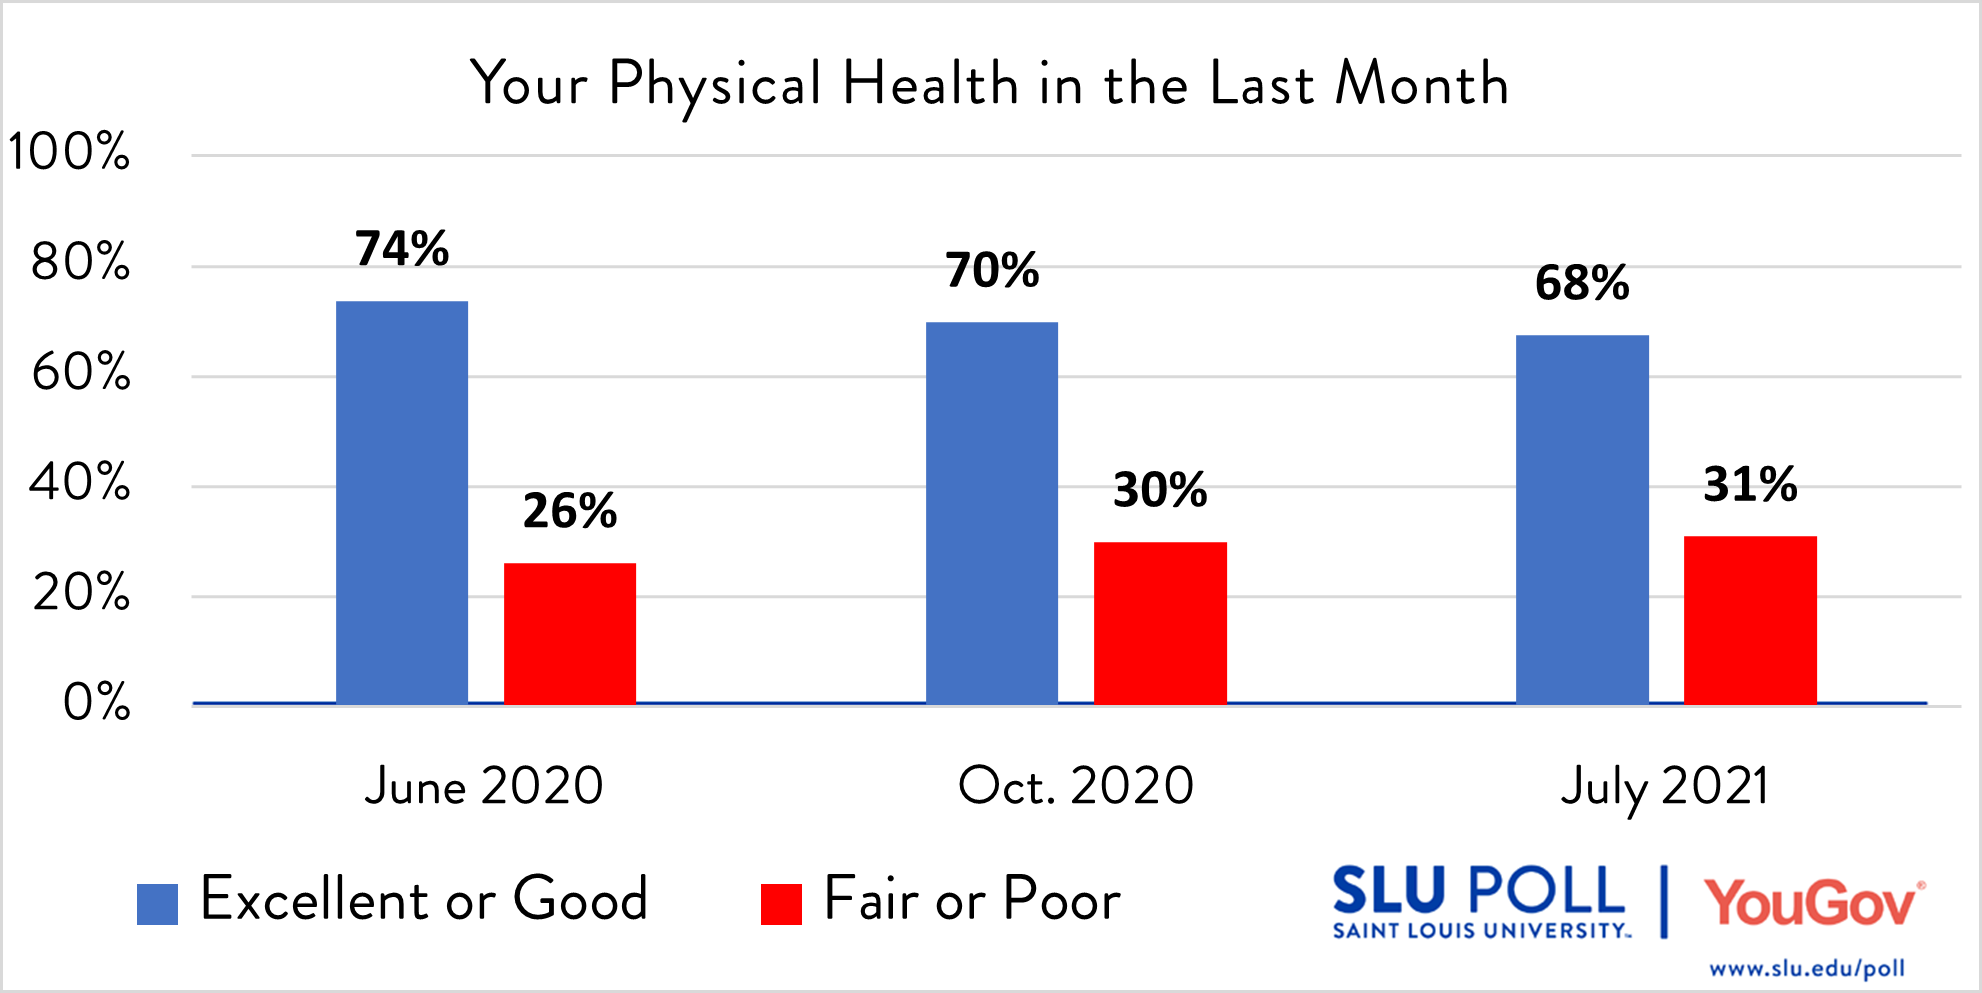 How would you rate the following…Your physical health in the last month? - Excellent: 16% - Good: 51% - Fair: 23% - Poor: 8% - Not sure: 2% Subsample Question: The sample size for this question is 477. The margin of error for the full results for the above question is ± 6.02%.